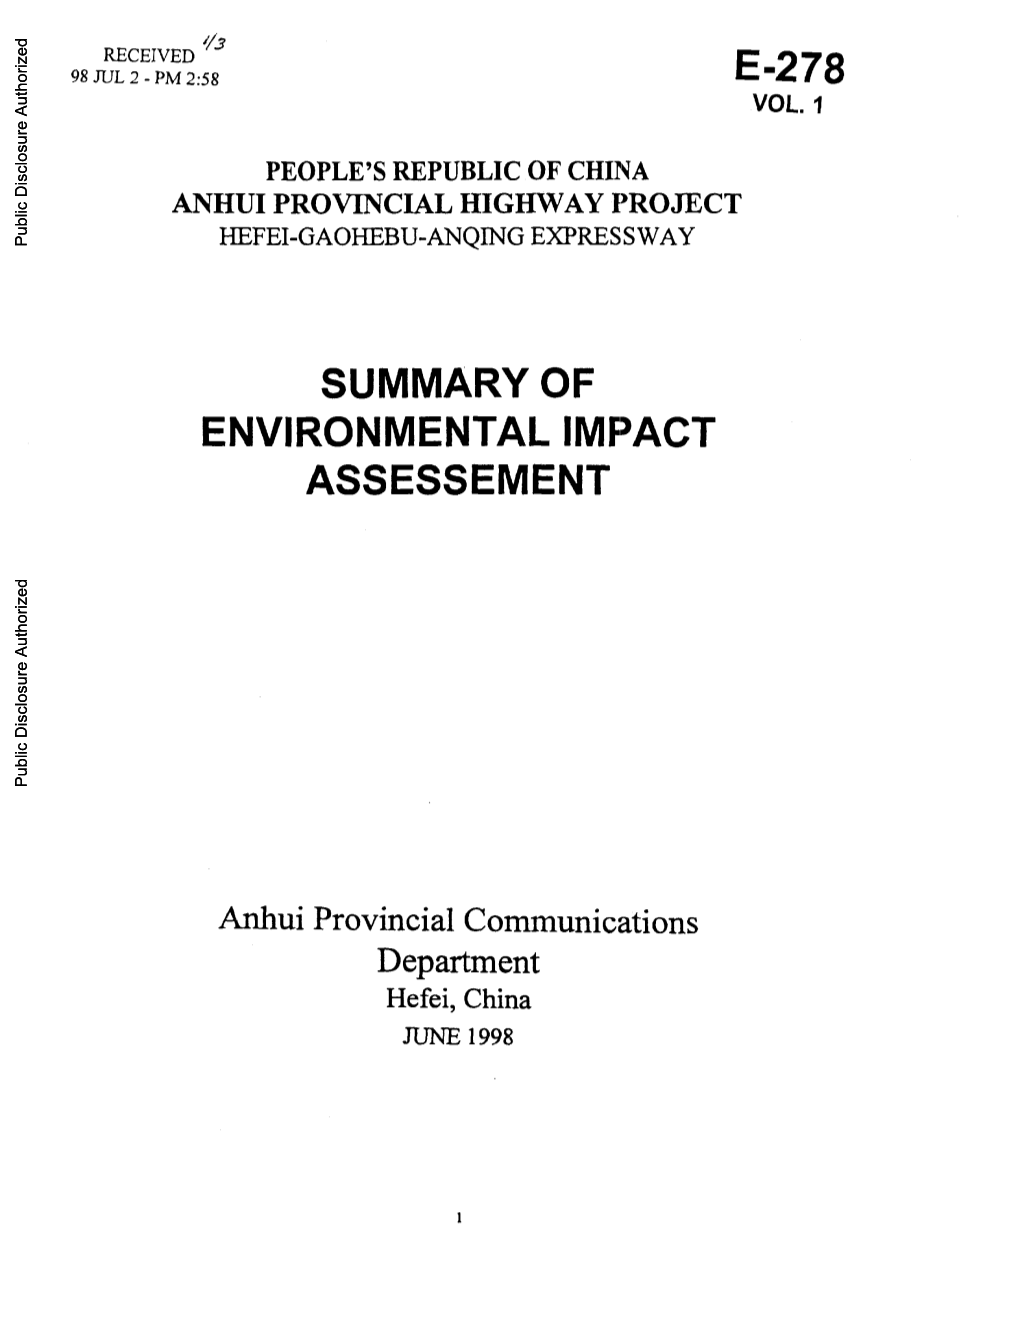 Anhui Provincial Highway Project Hefei-Gaohebu-Anqing Expressway Summary of Environmental Impact Assessment